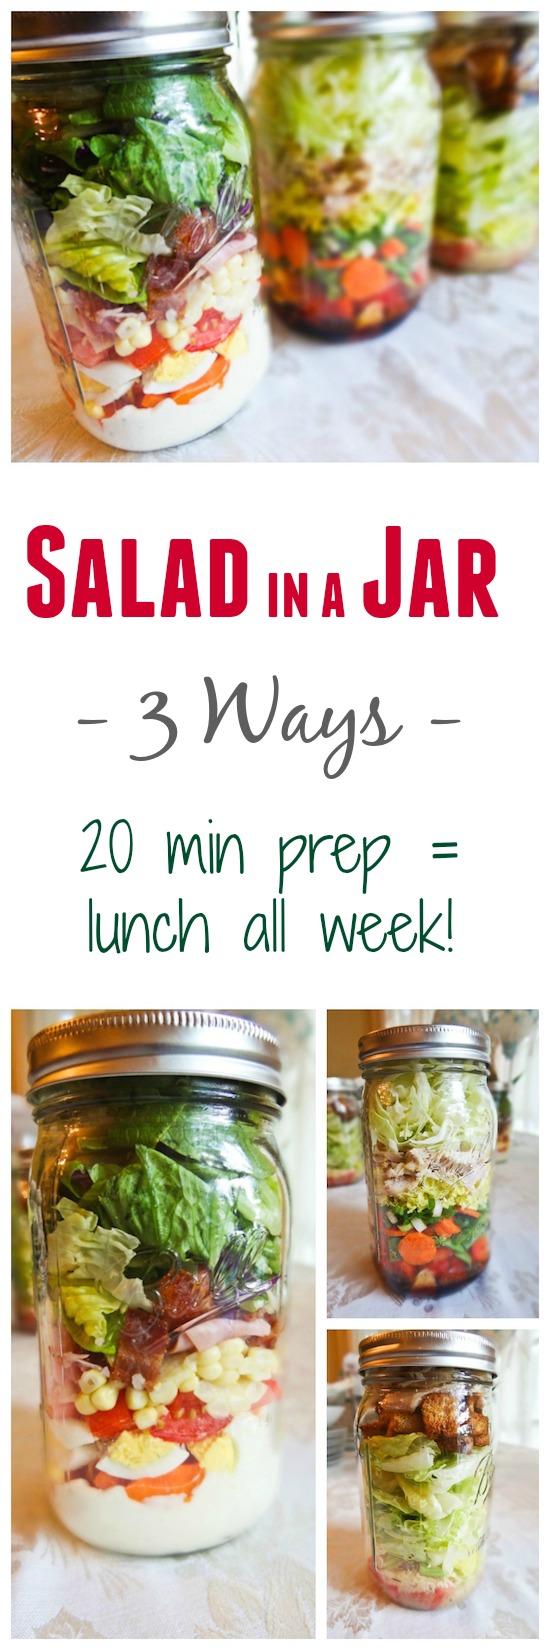 Looking for a quick lunch option? Spend 20 minutes prepping and you can have lunches ready and waiting in the fridge all week long. Try these 3 flavor combos or create your own!